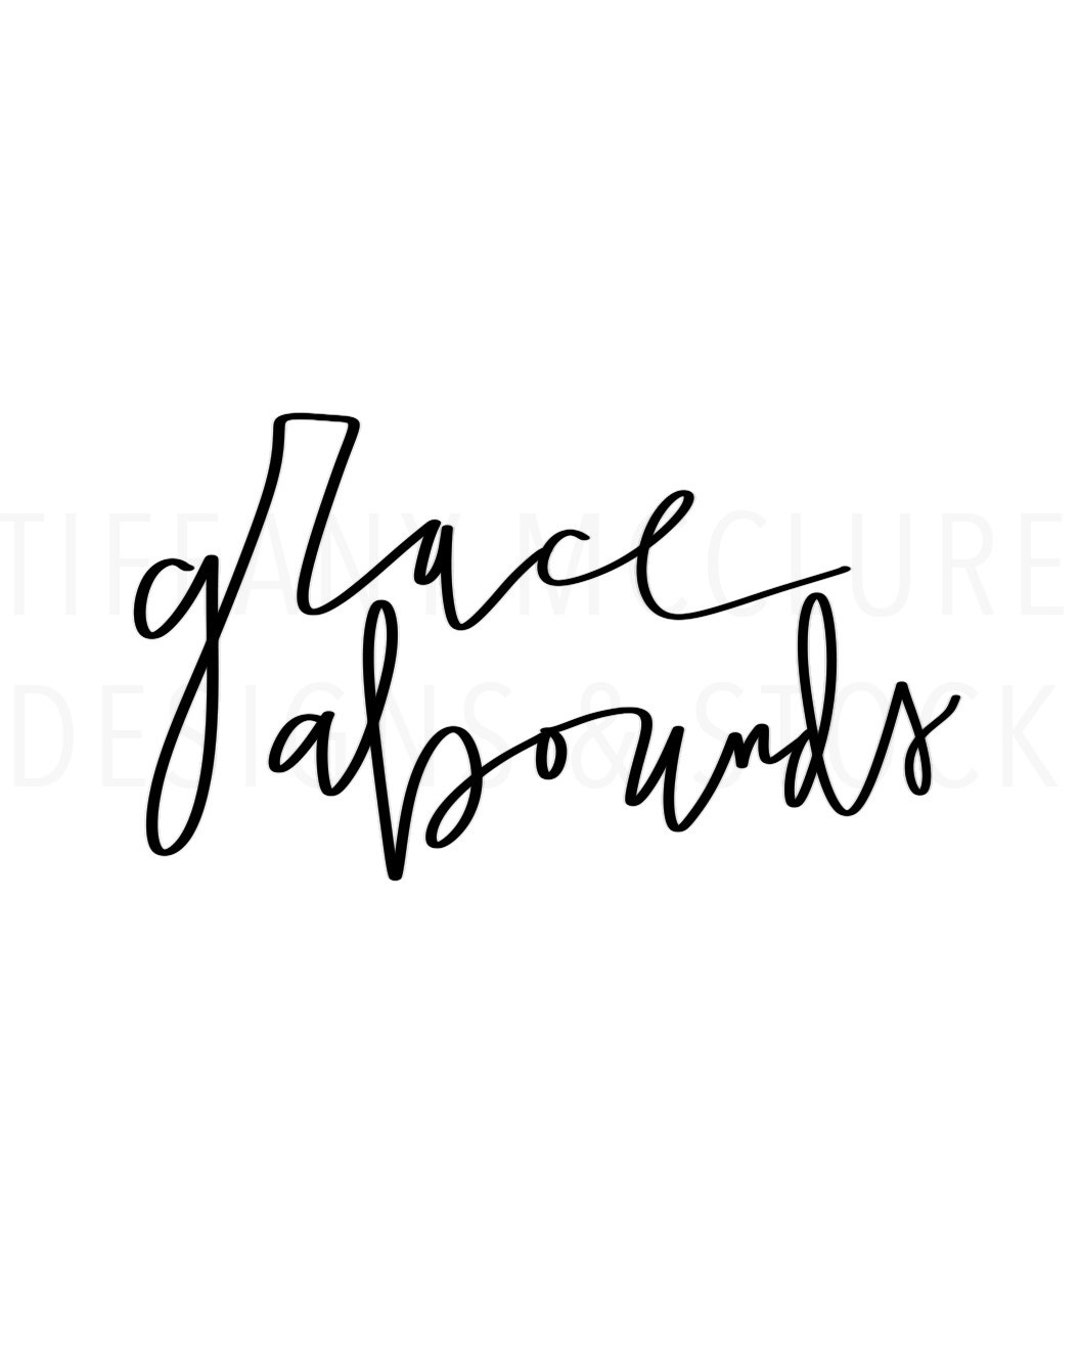 Grace Abounds Hand Lettering - Etsy